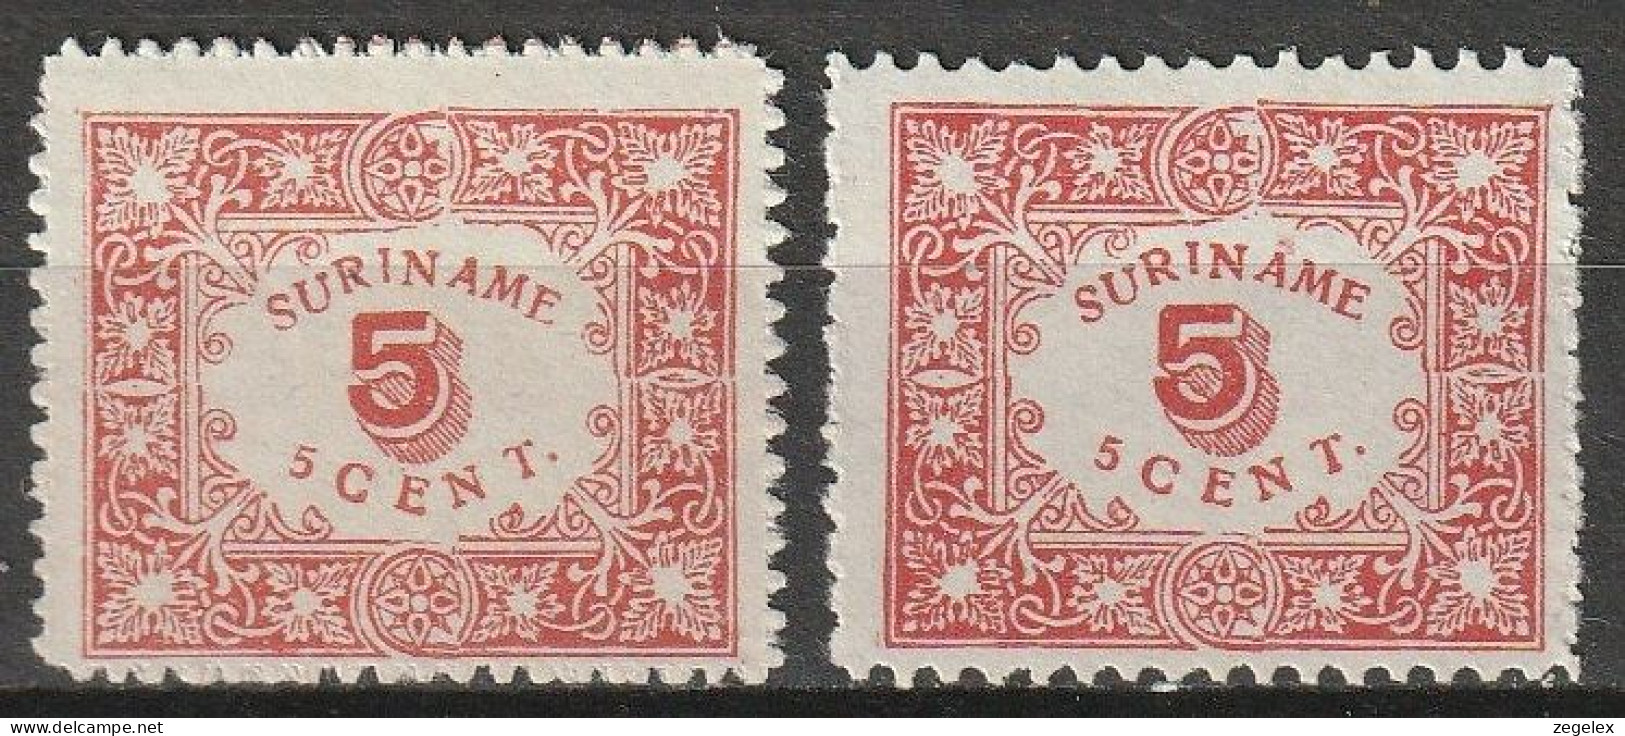 Suriname 1909 Hulpuitgifte 5 Ct NVPH 58 And 59 MNG Mint No Gum (as Issued), Ongestempeld Zonder Gom - Suriname ... - 1975